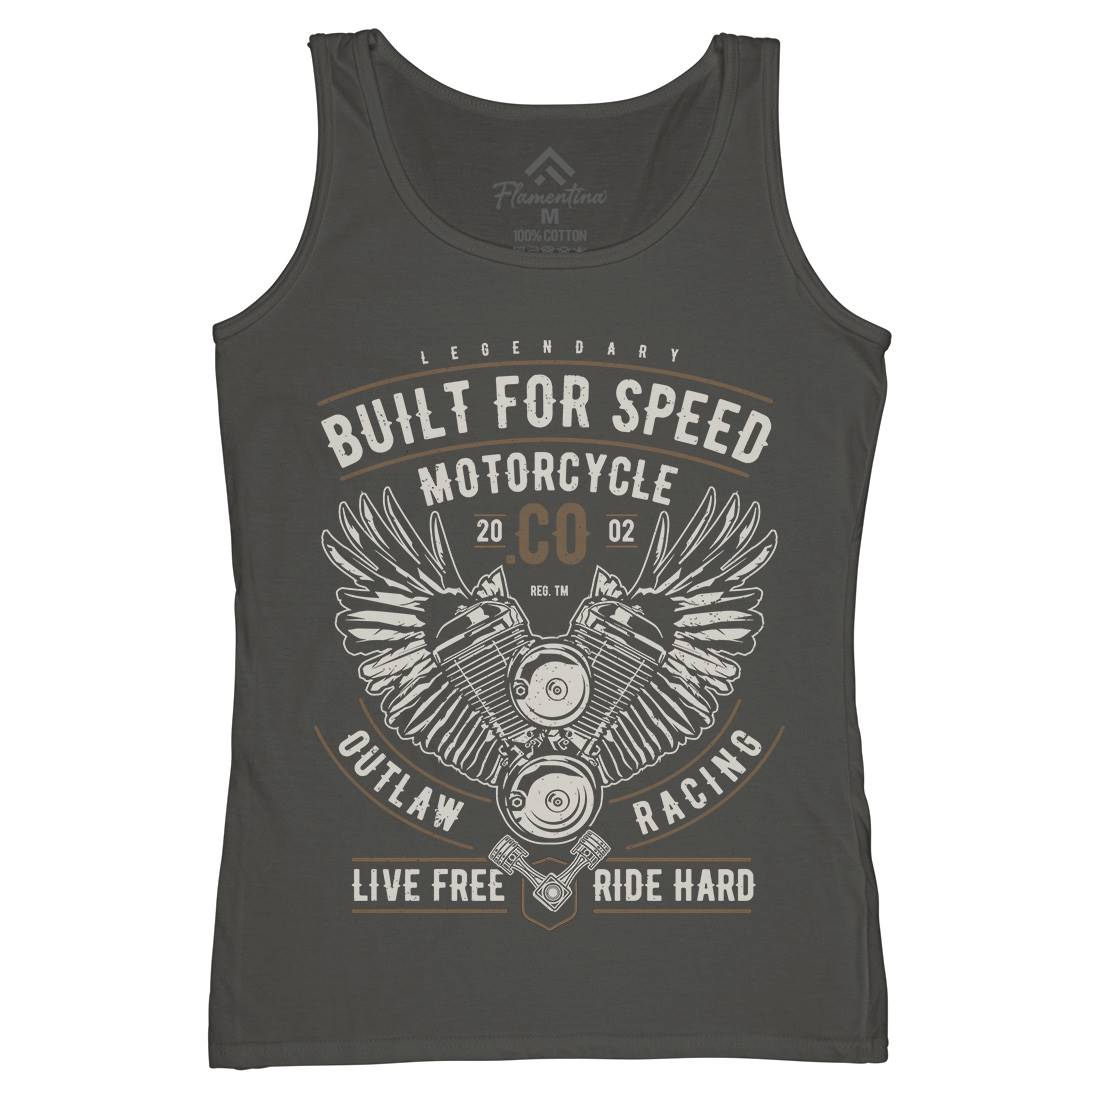 Built For Speed Womens Organic Tank Top Vest Motorcycles A628